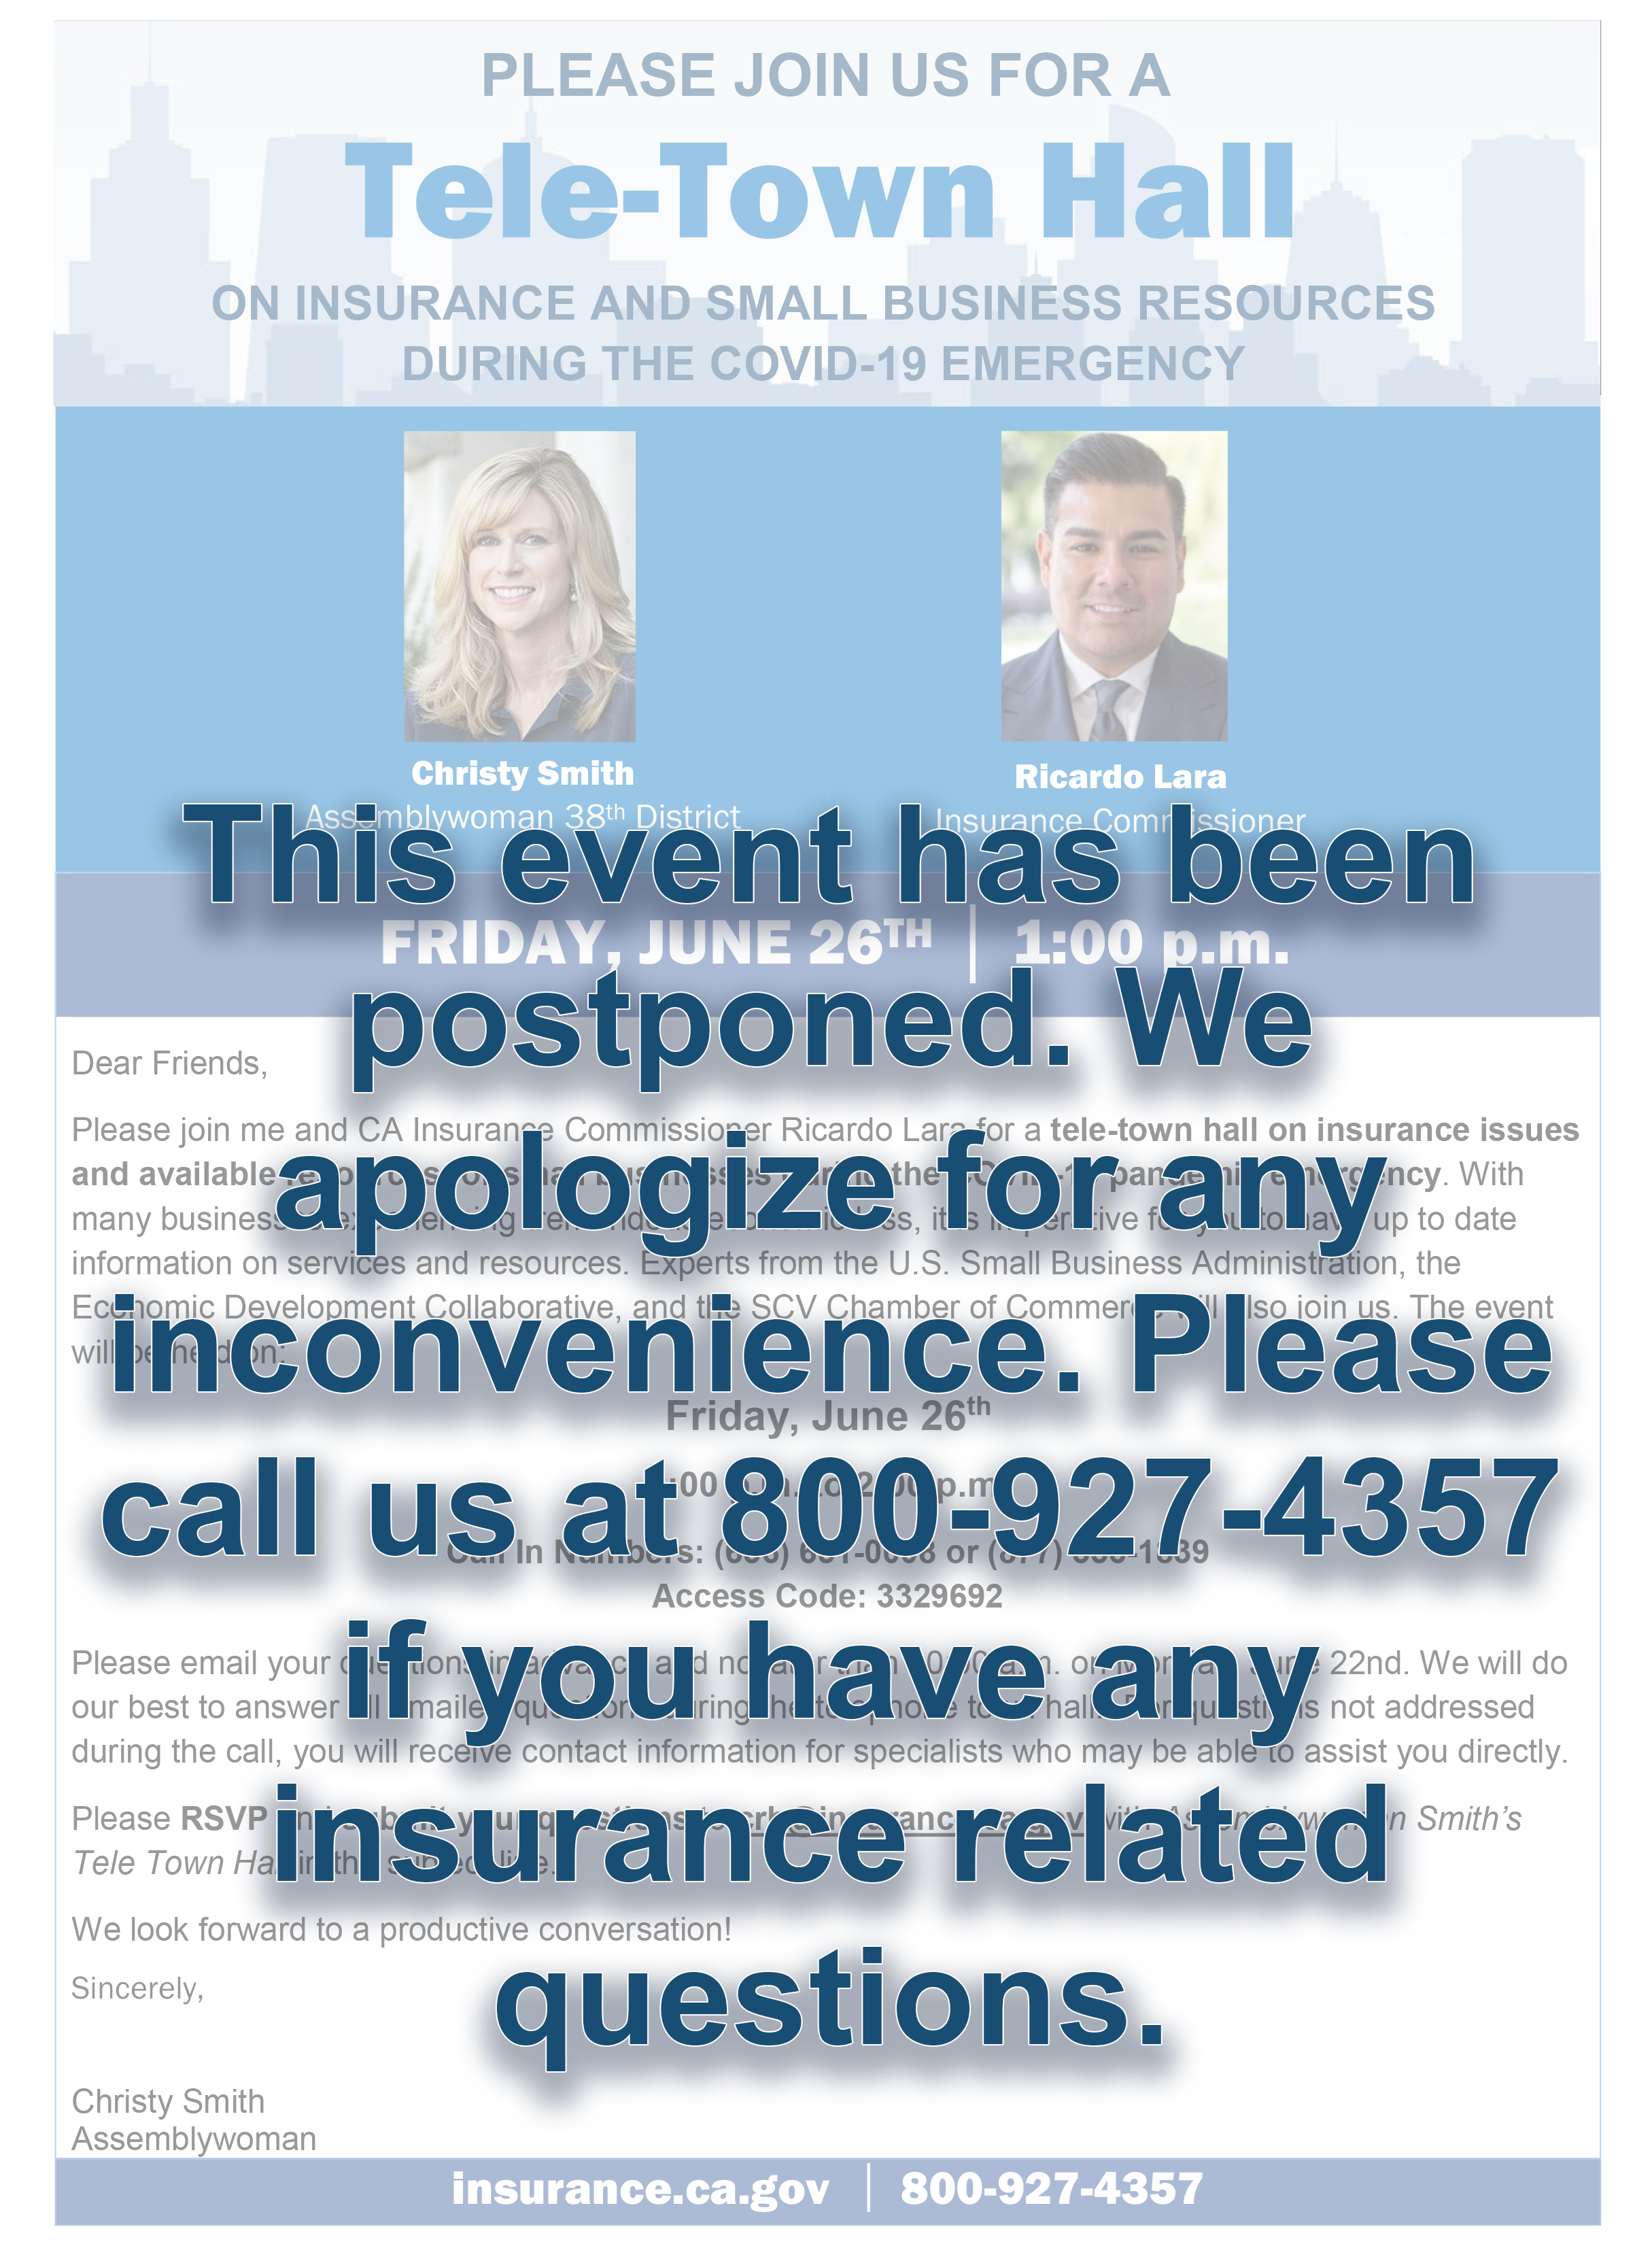 Assemblymember Christy Smith Tele town hall event for June 26th has been postponed. We apologize for any inconvenience. Please call us at 800-927-4357 if you have any insurance related questions.